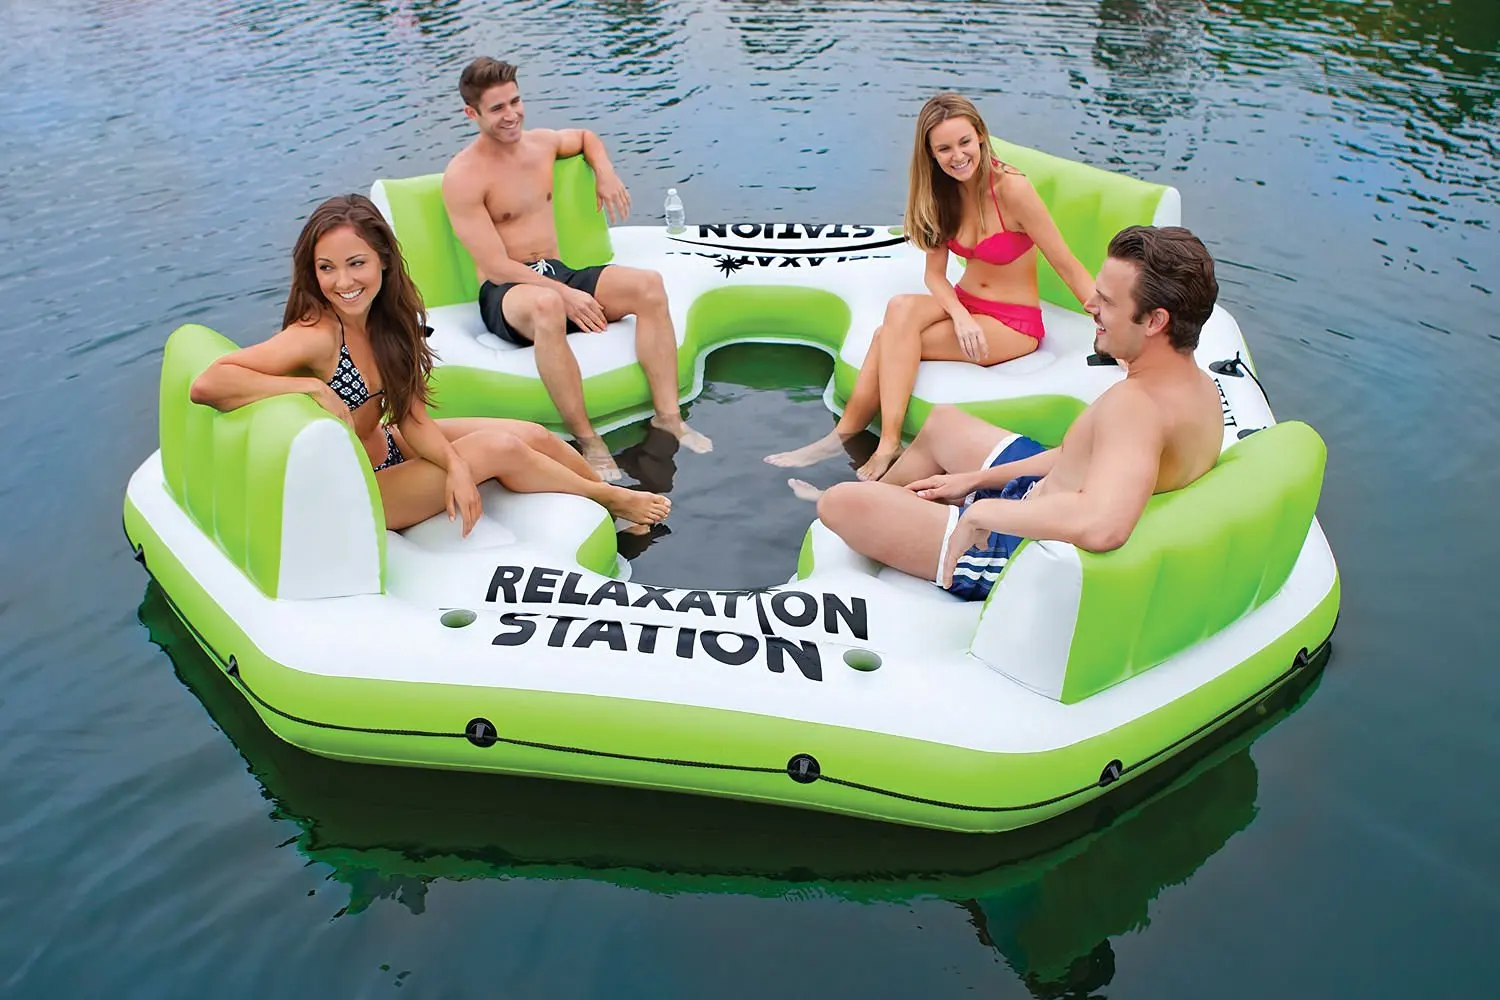 New Shop Intex Pacific Paradise Relaxation Station Water Lounge 4-Person Ri...